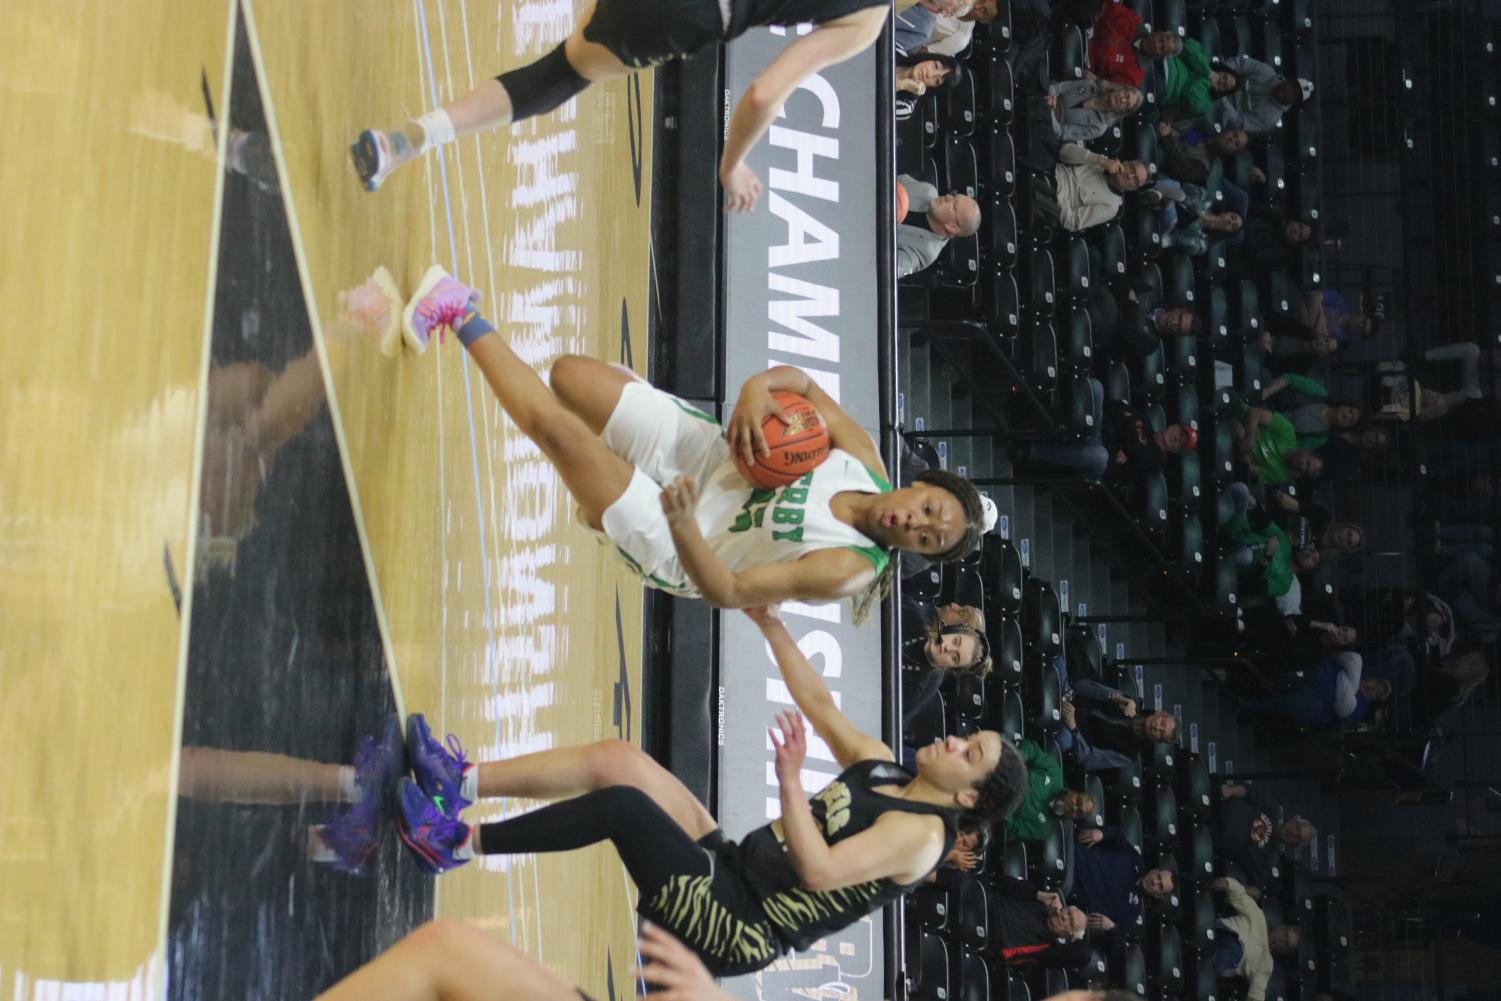 Girls+State+Semifinals+vs+Blue+Valley+%40+Koch+Arena+%28Photos+by+Janeah+Berry%29